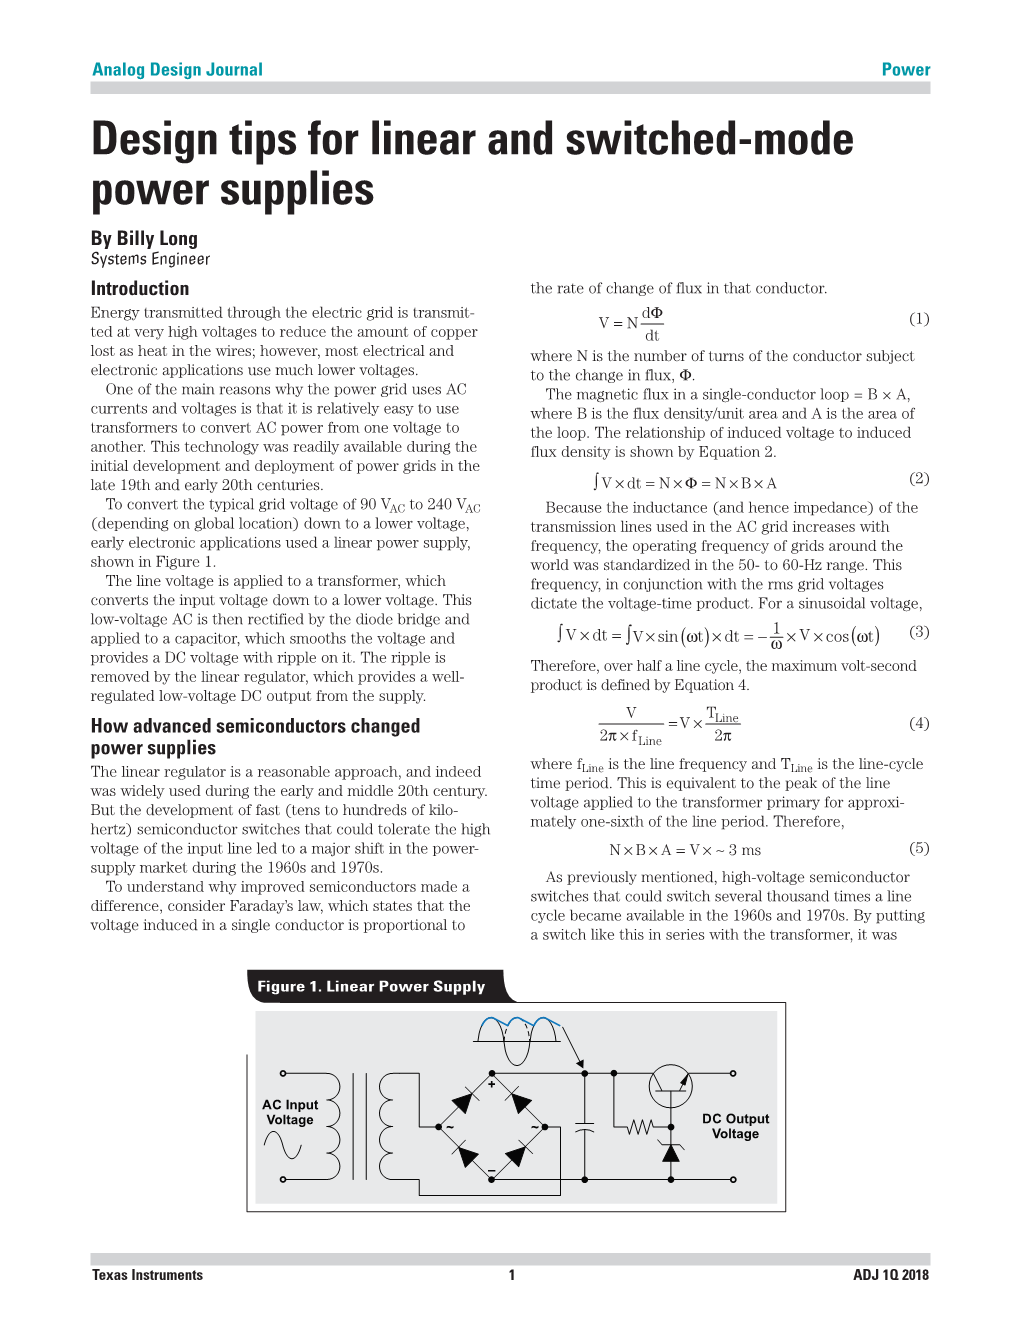 Design Tips for Linear and Switched‐Mode Power Supplies